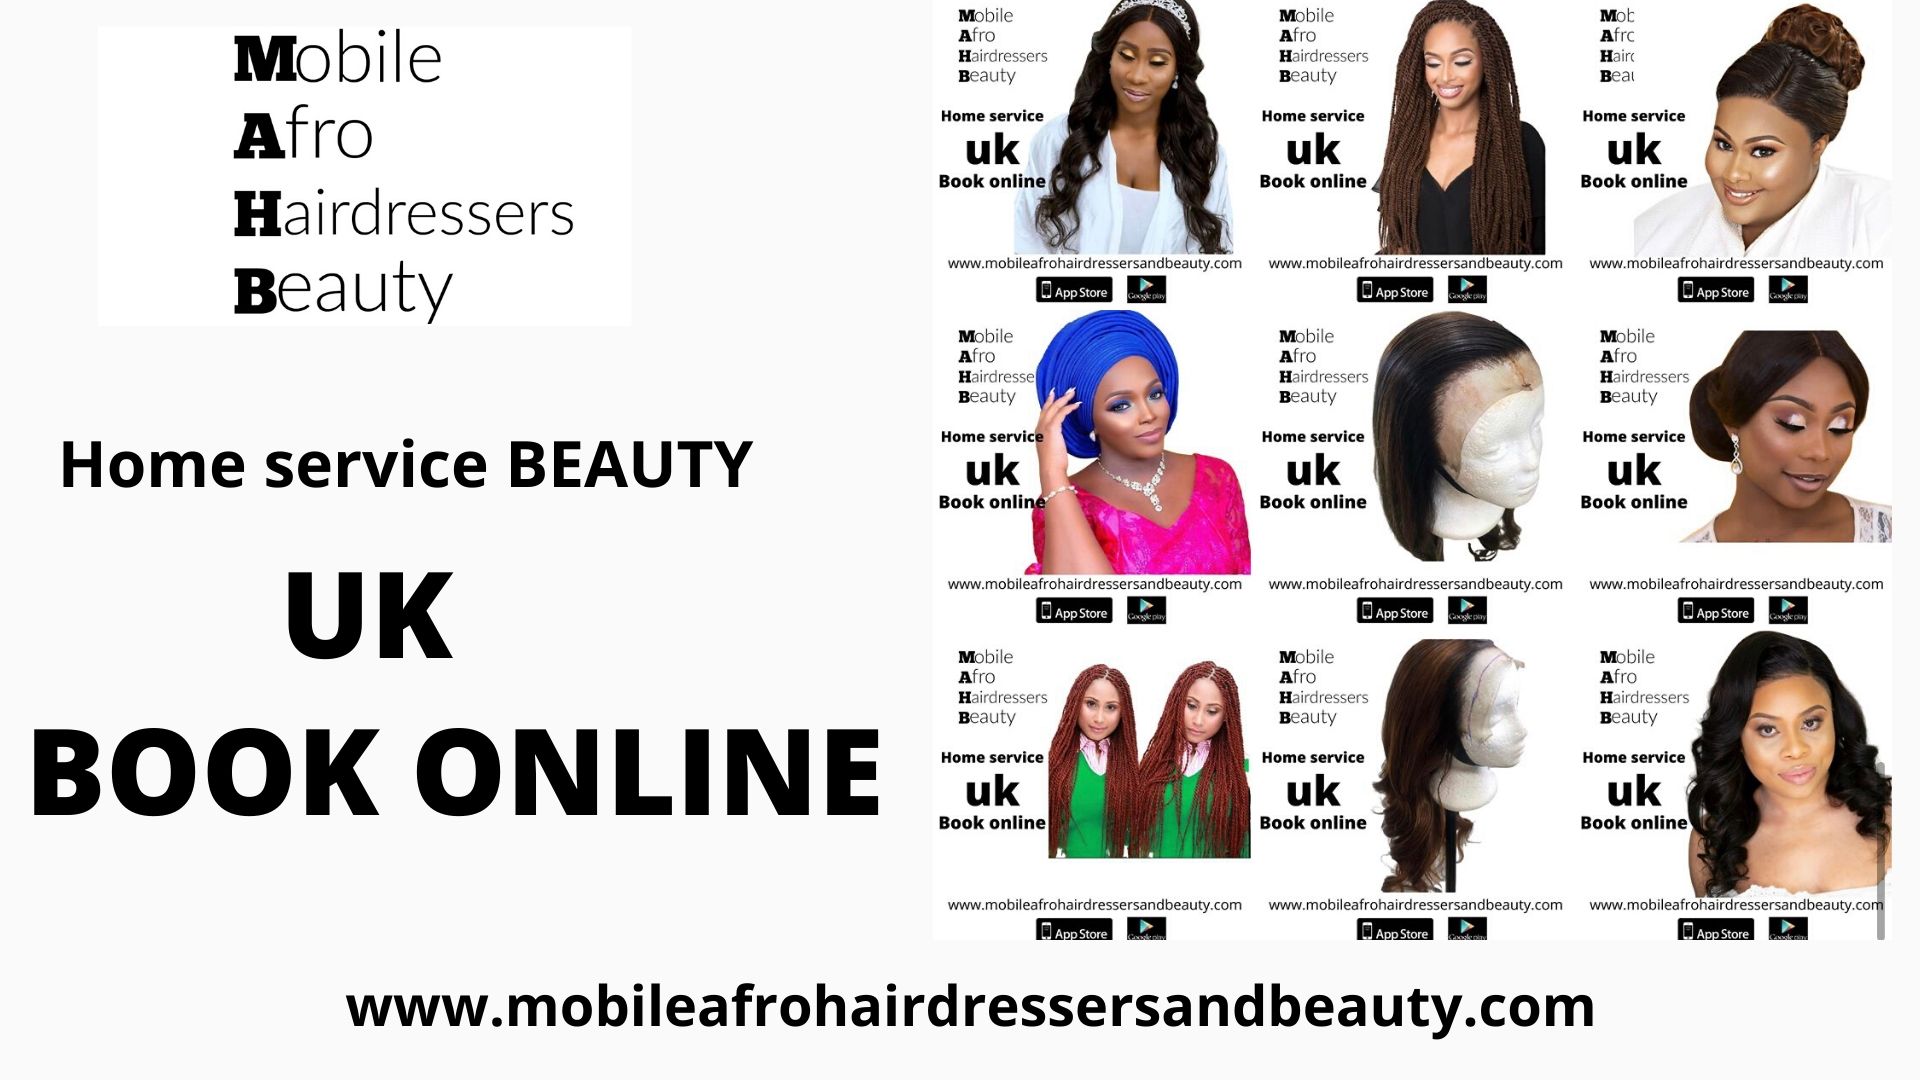 WANTED IN THE UK !! MOBILE AFRO HAIRDRESSERS /MOBILE MAKEUP ARTIST /MOBILE SALON VACANCY